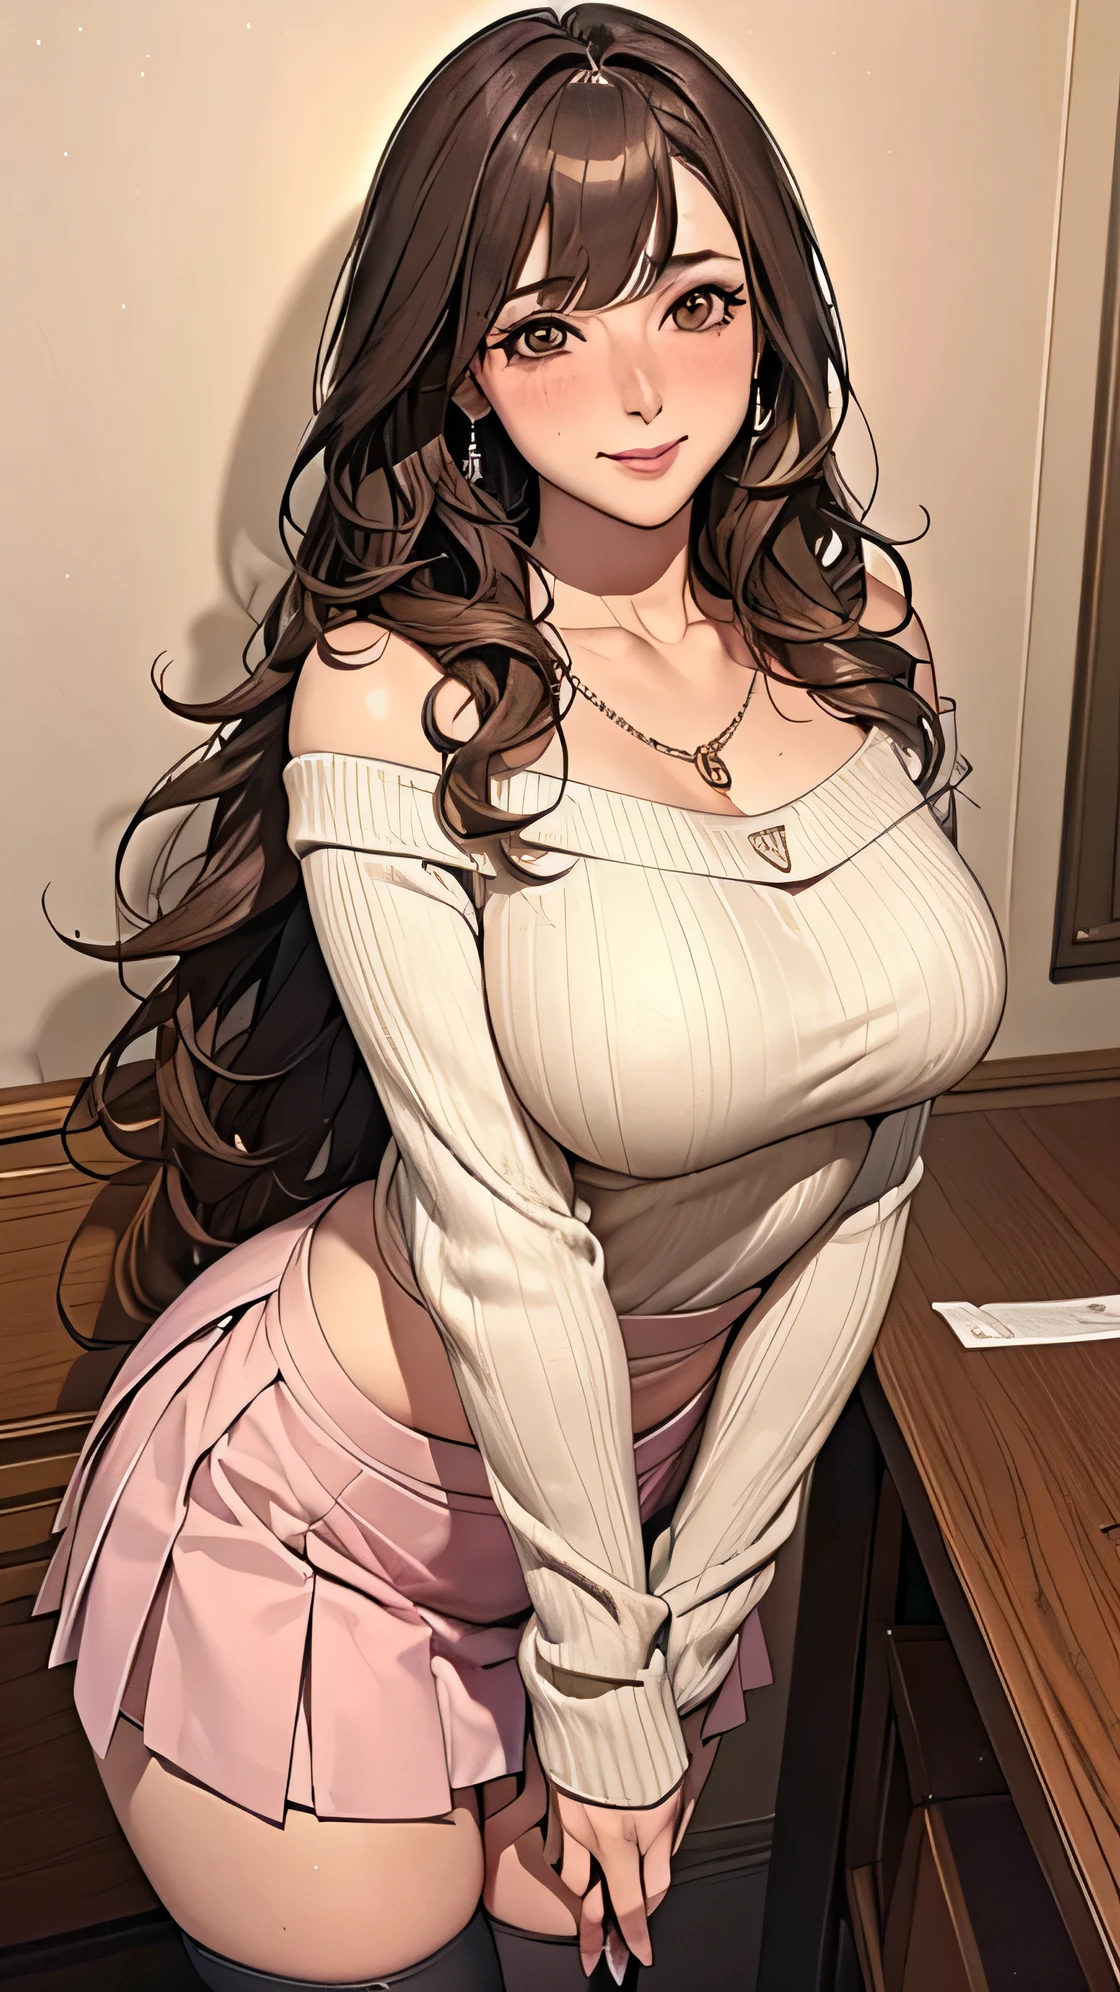 (table top, highest quality, High resolution, , perfect pixel, 4k,), 1 girl, single, alone, Beautiful woman、I could see the whole body、 ((Wavy mid-hair, bangs, brown hair)), ((brown eyes, beautiful eyelashes, realistic eyes)), ((detailed face, blush:1.2)), ((smooth texture:0.75, realistic texture:0.65, realistic:1.1, Anime CG style)), medium breasts, dynamic angle, perfect body, female teacher, earrings、necklace、beige off shoulder sweater、Long pleated skirt、black knee high stockings、pink lace panties、shy smile, Upper grade、Bring your arms together to emphasize your chest、